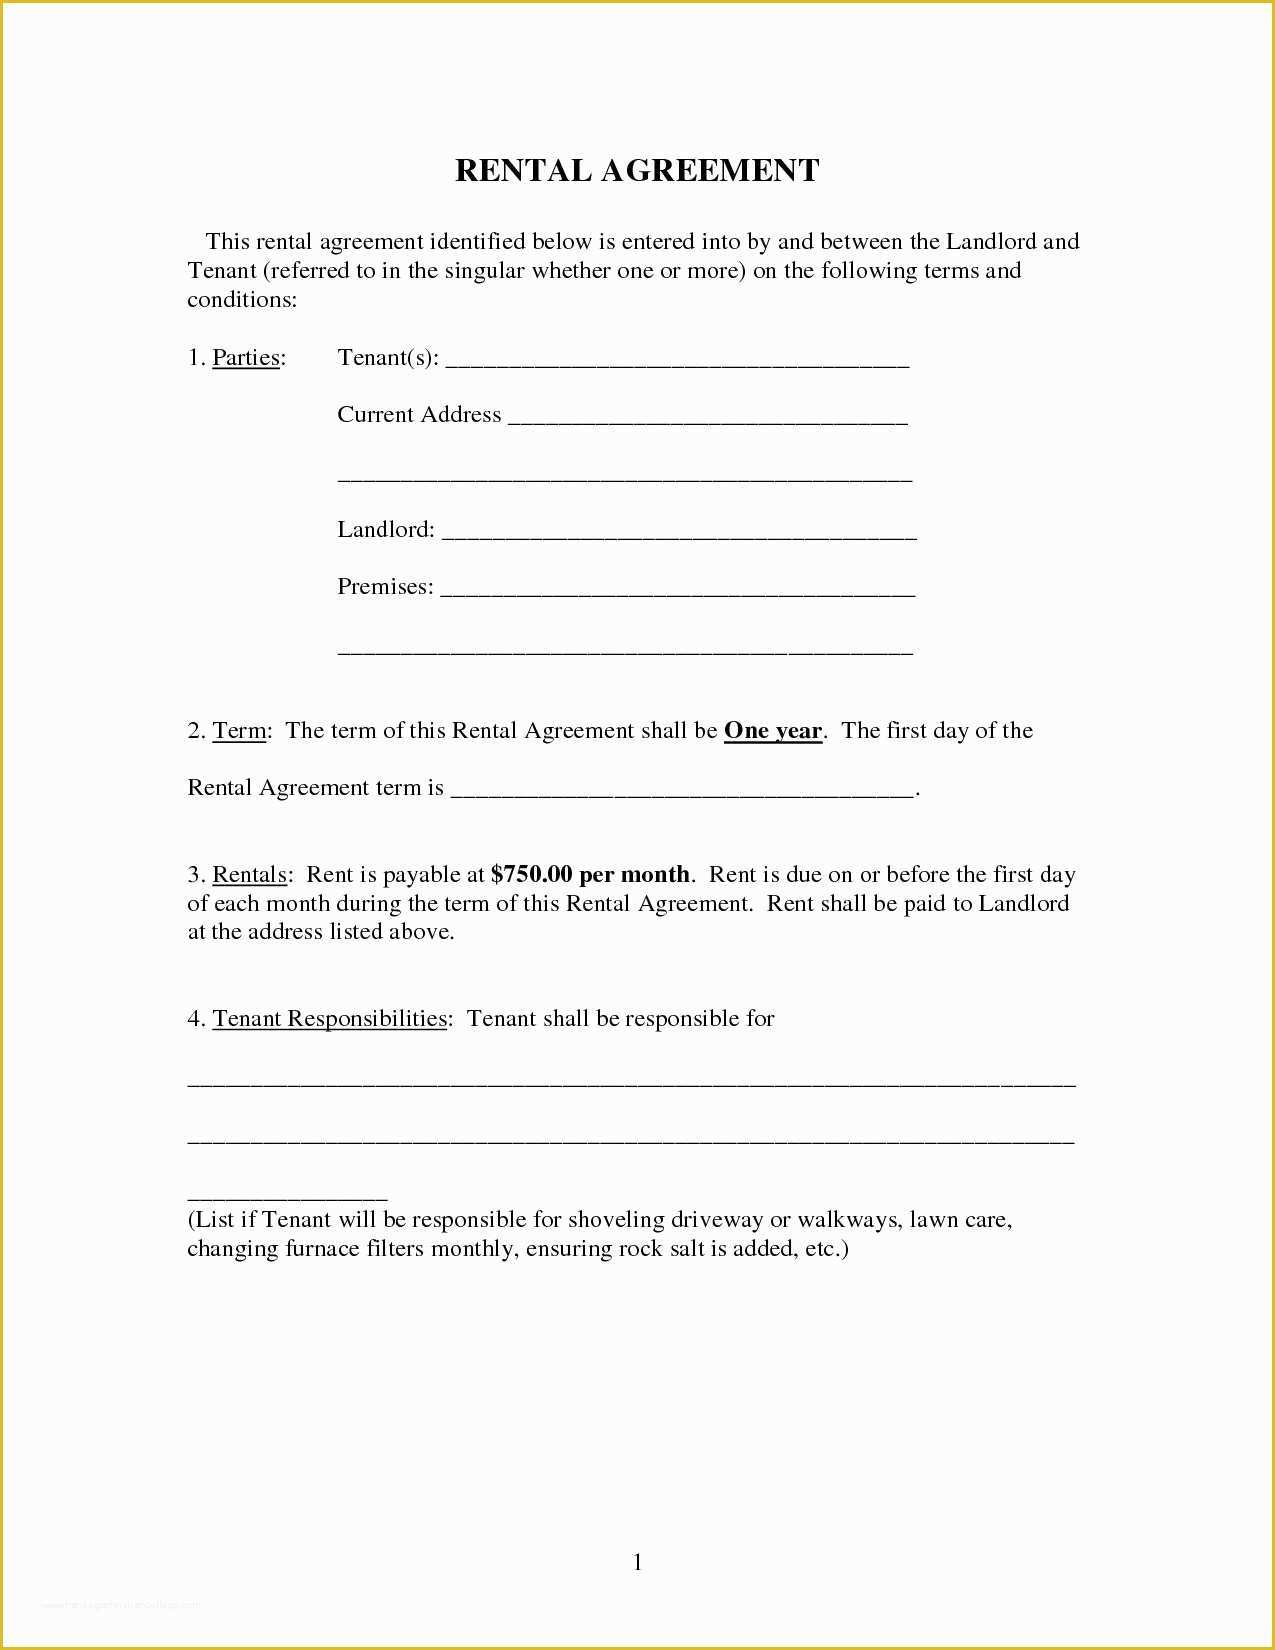 Free Landlord Lease Agreement Template Of 45 Detail Landlord Rental Agreement form Free Yu D